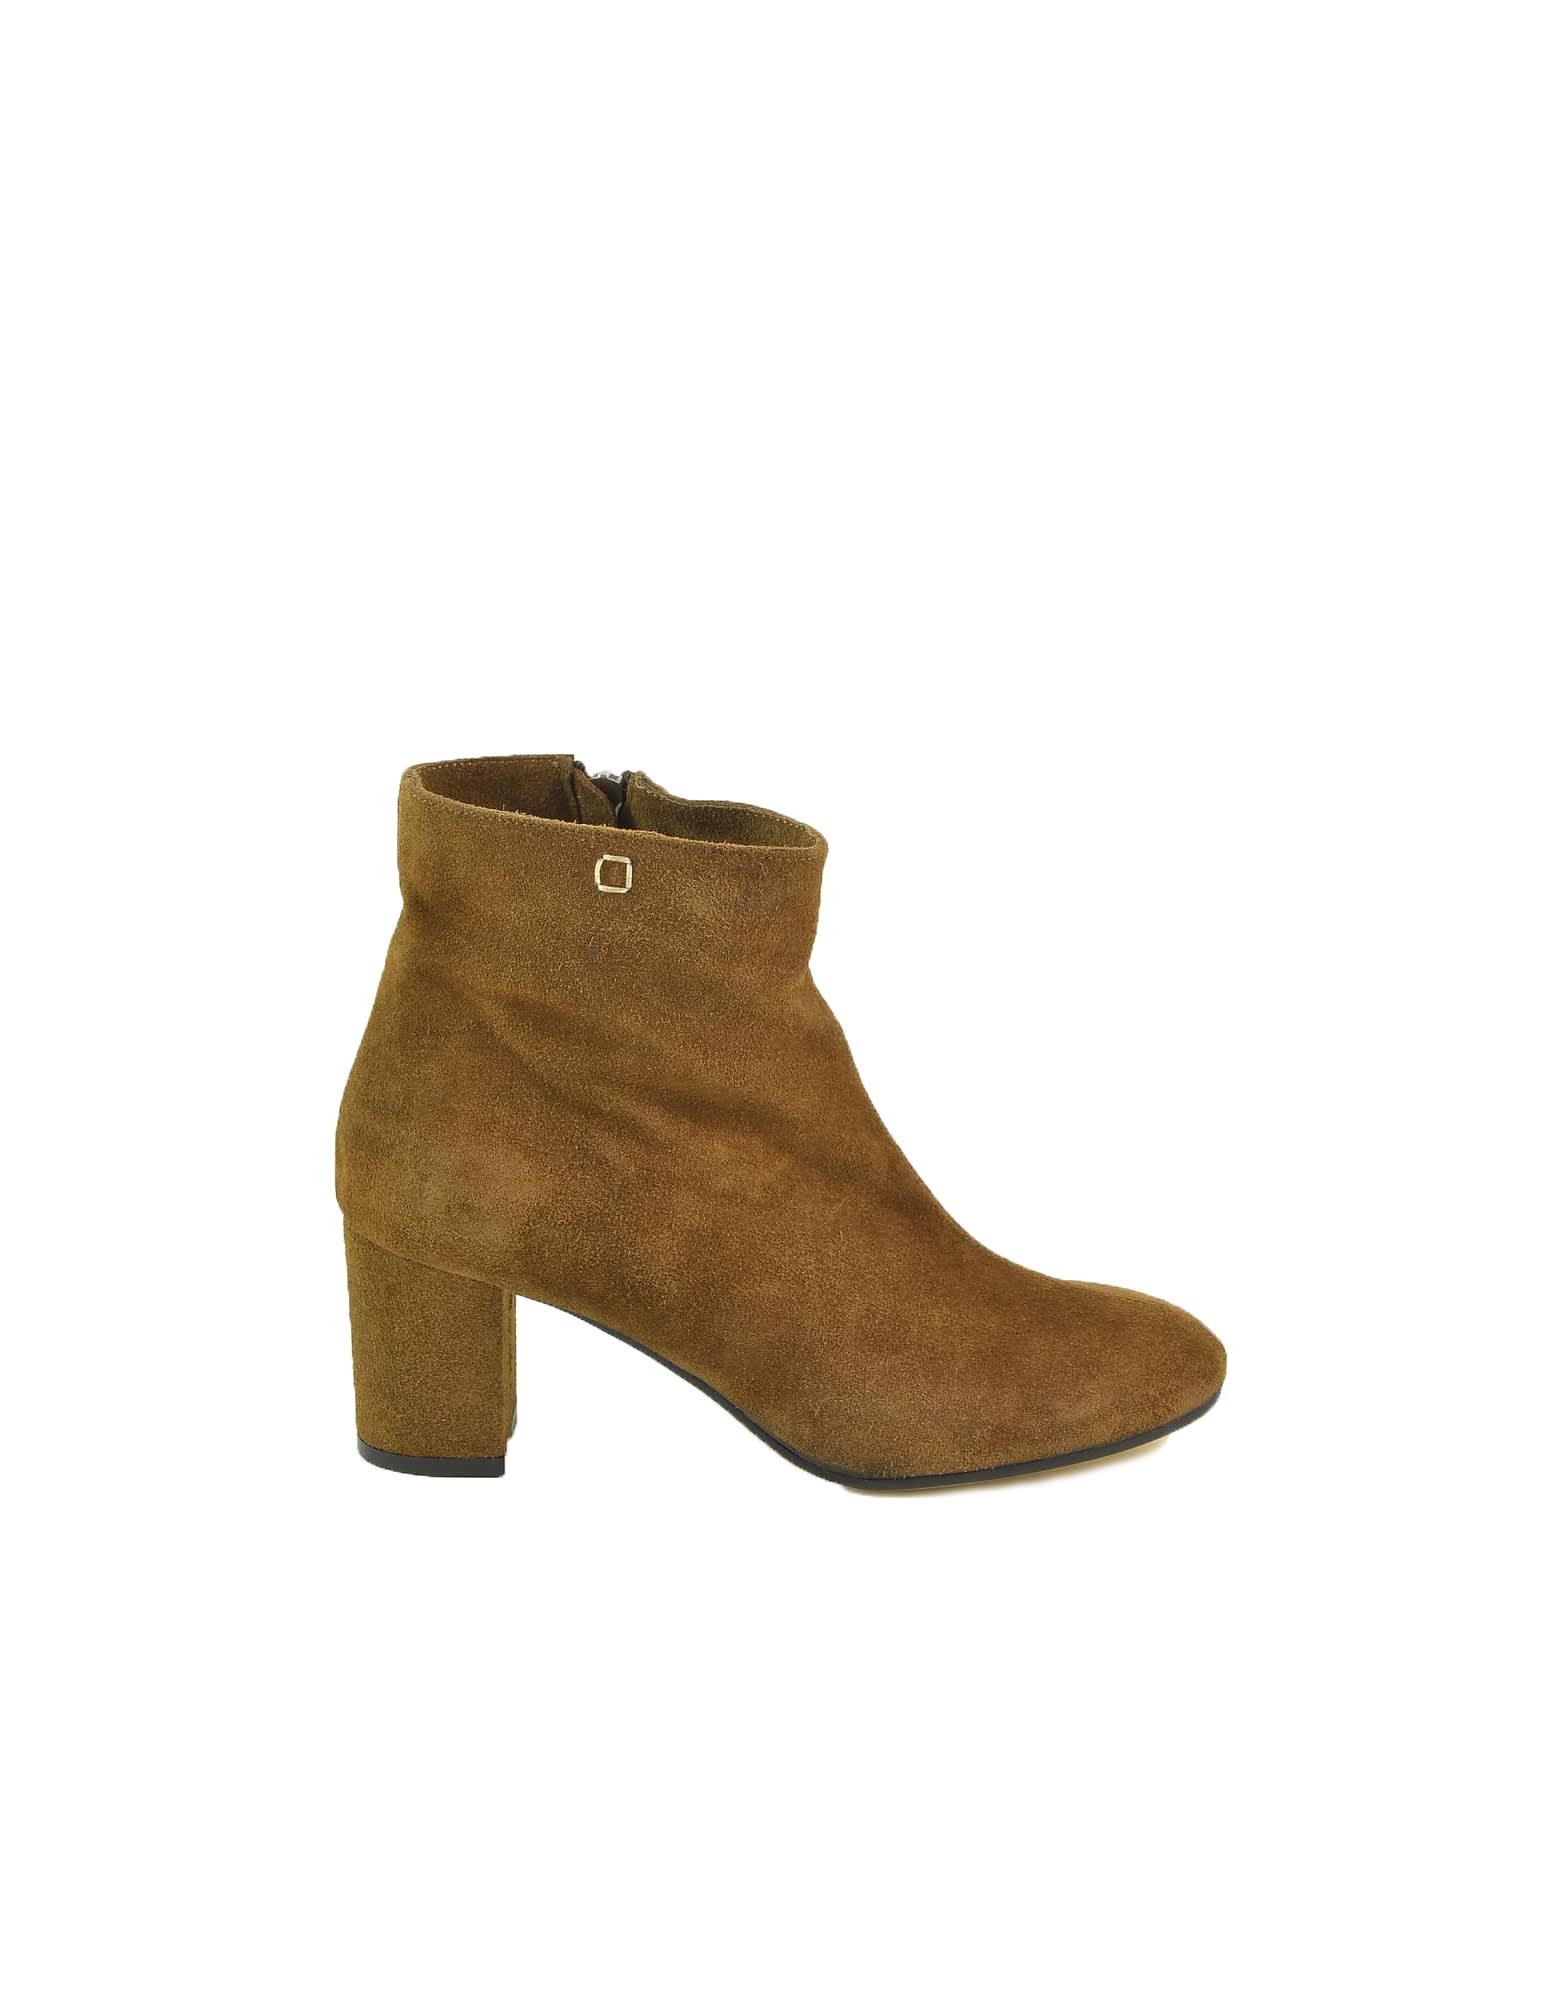 Collection Privèe Womens Camel Booties